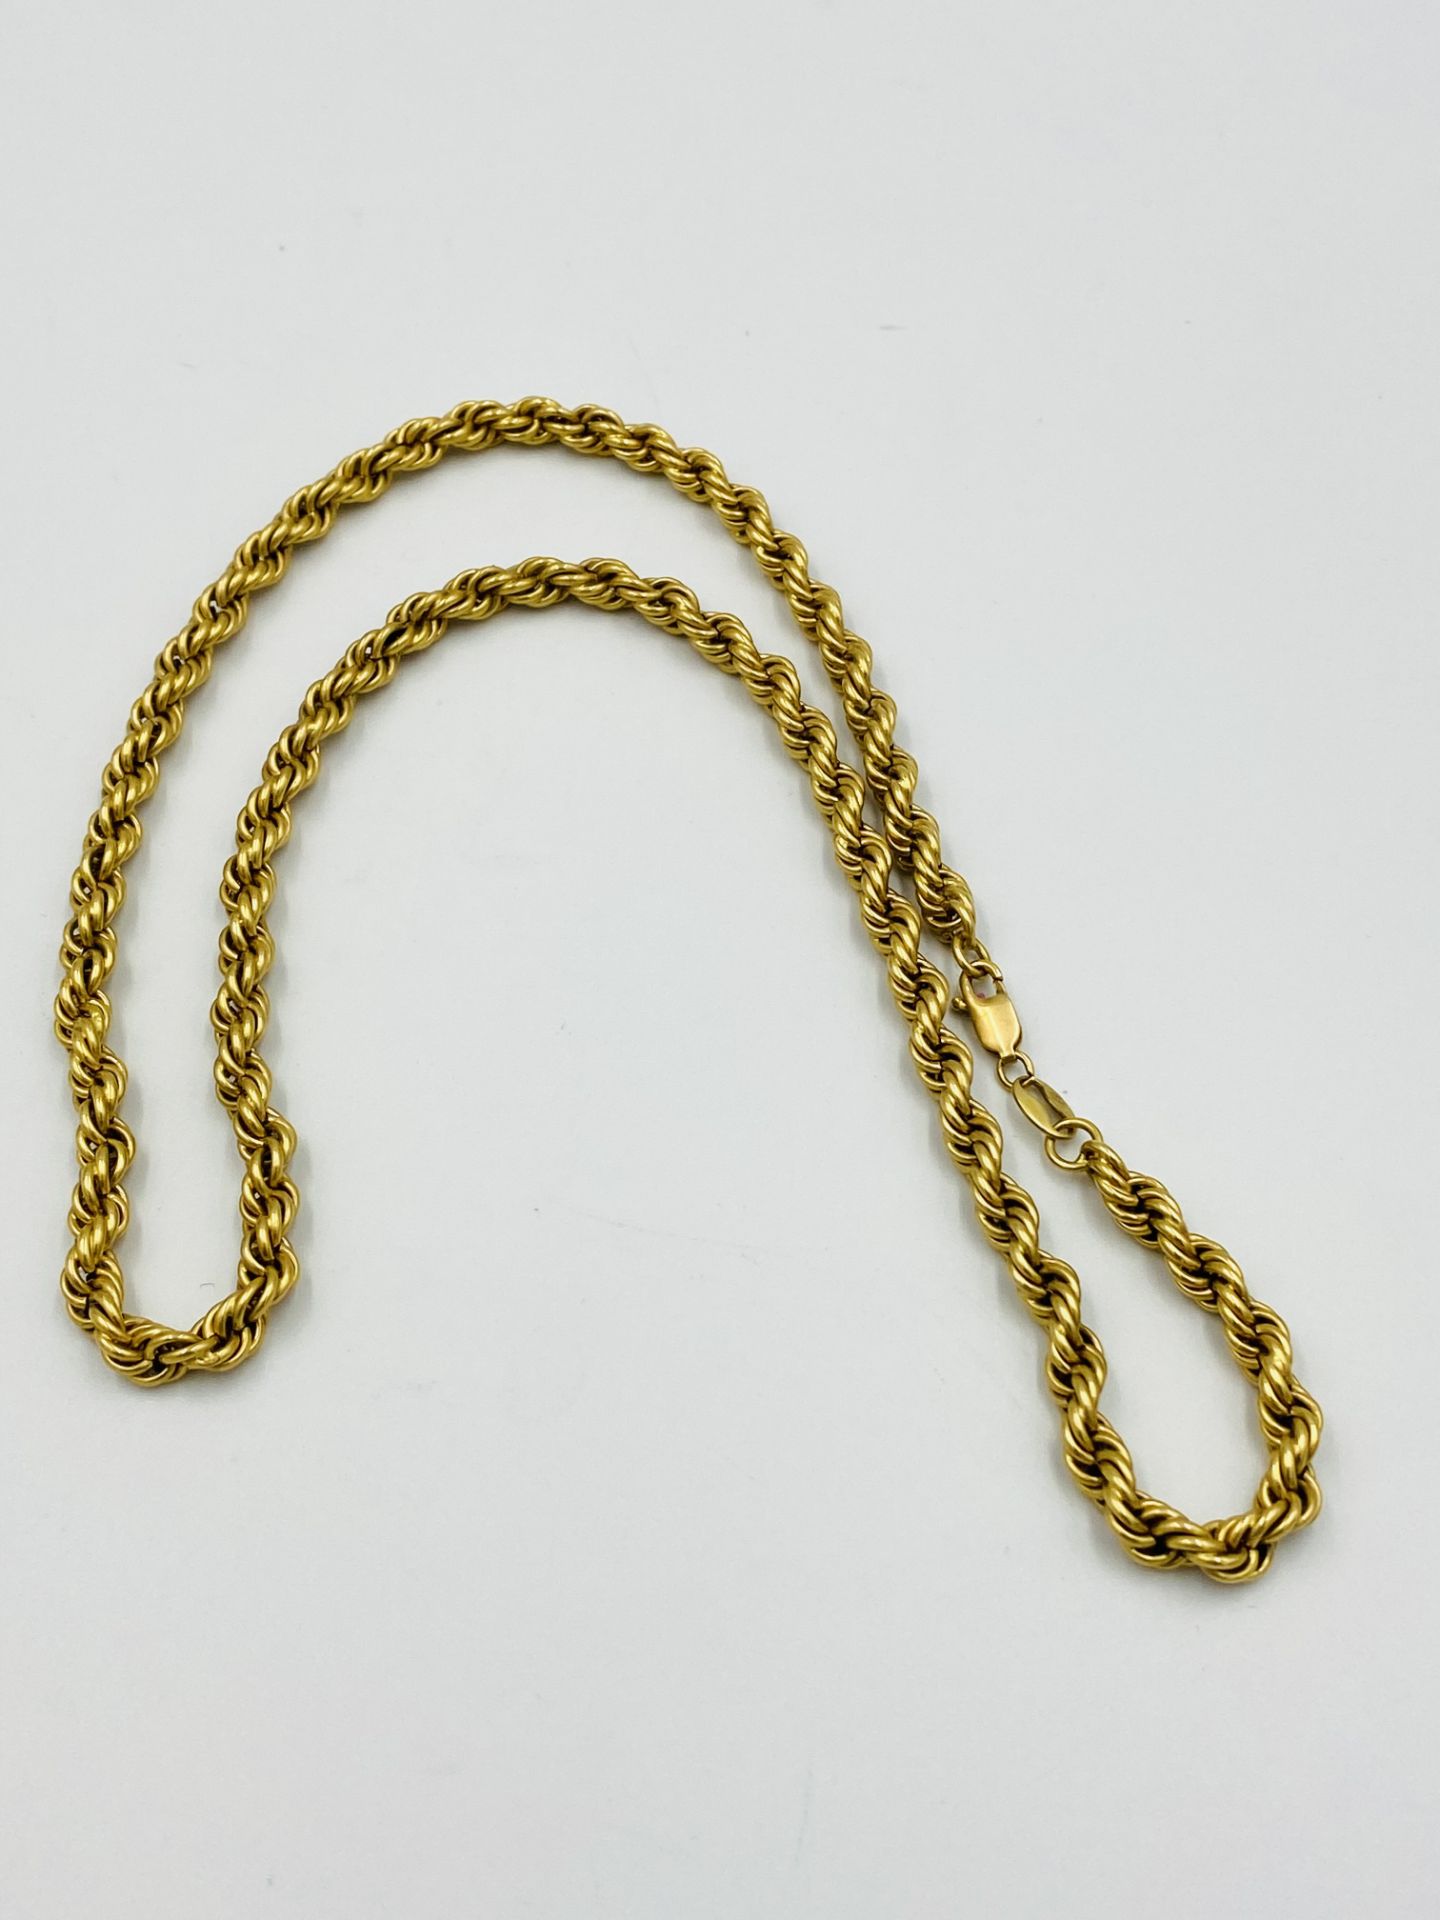 18ct gold rope twist chain - Image 2 of 4